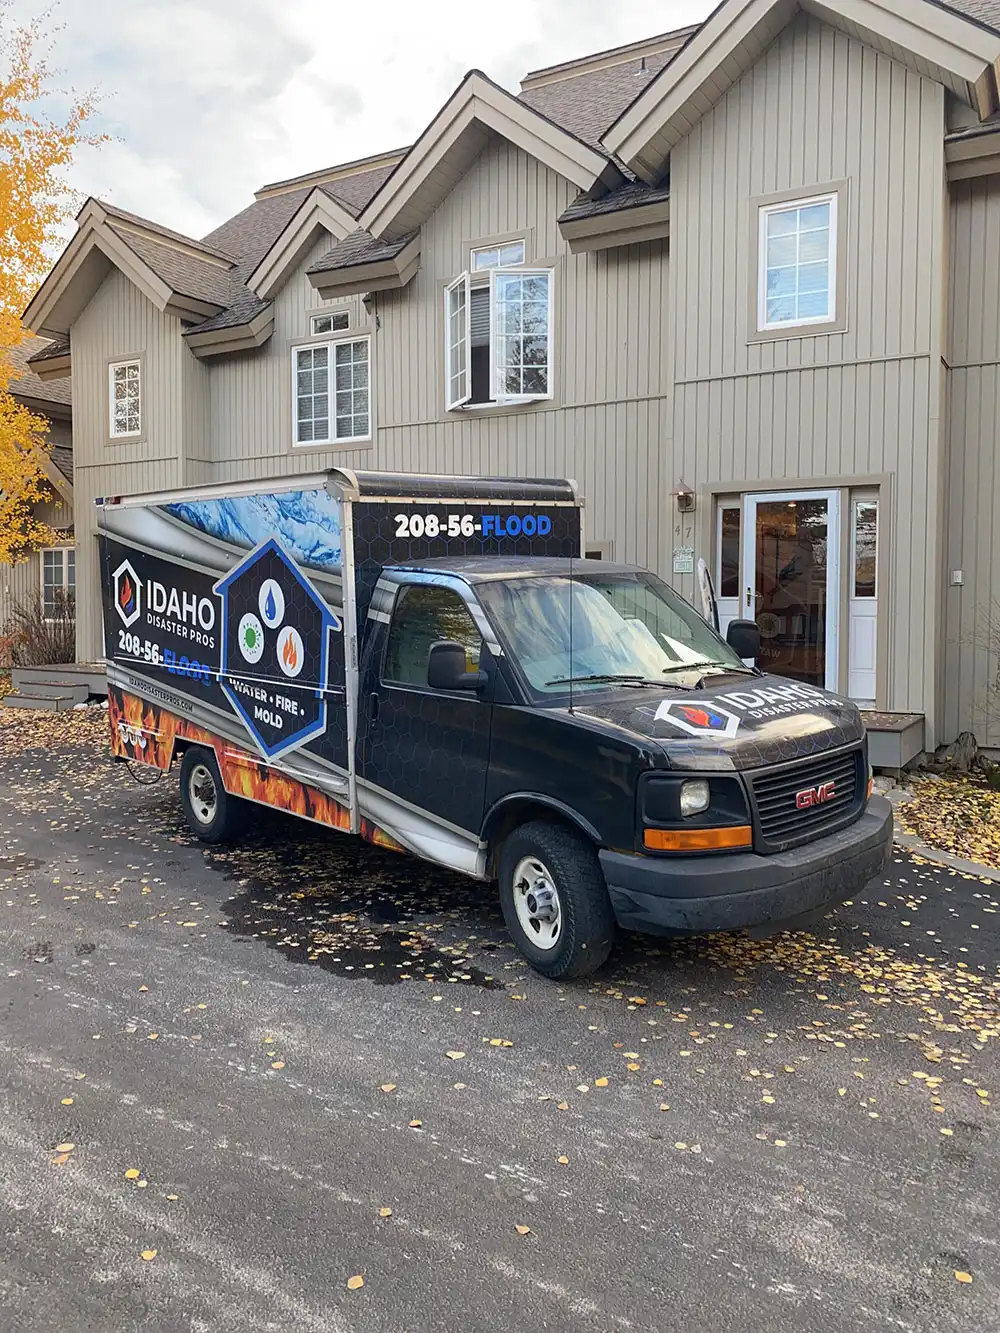 Idaho Disaster Pros work truck outside of brown home